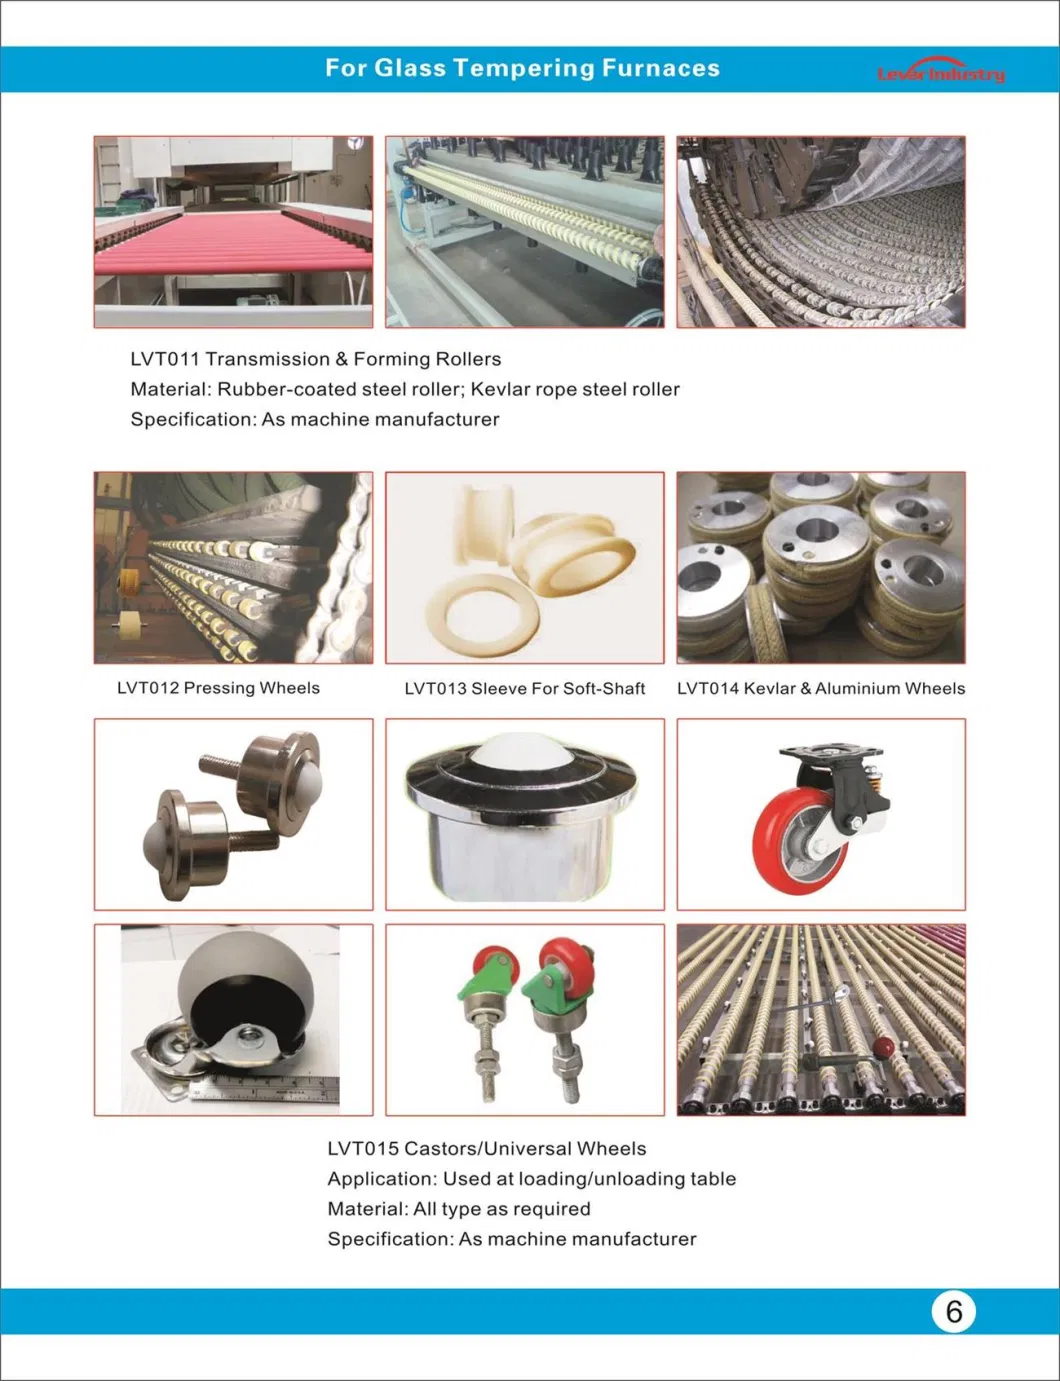 Parts for Tempering Furnace, Tempering Furnace Spare Parts